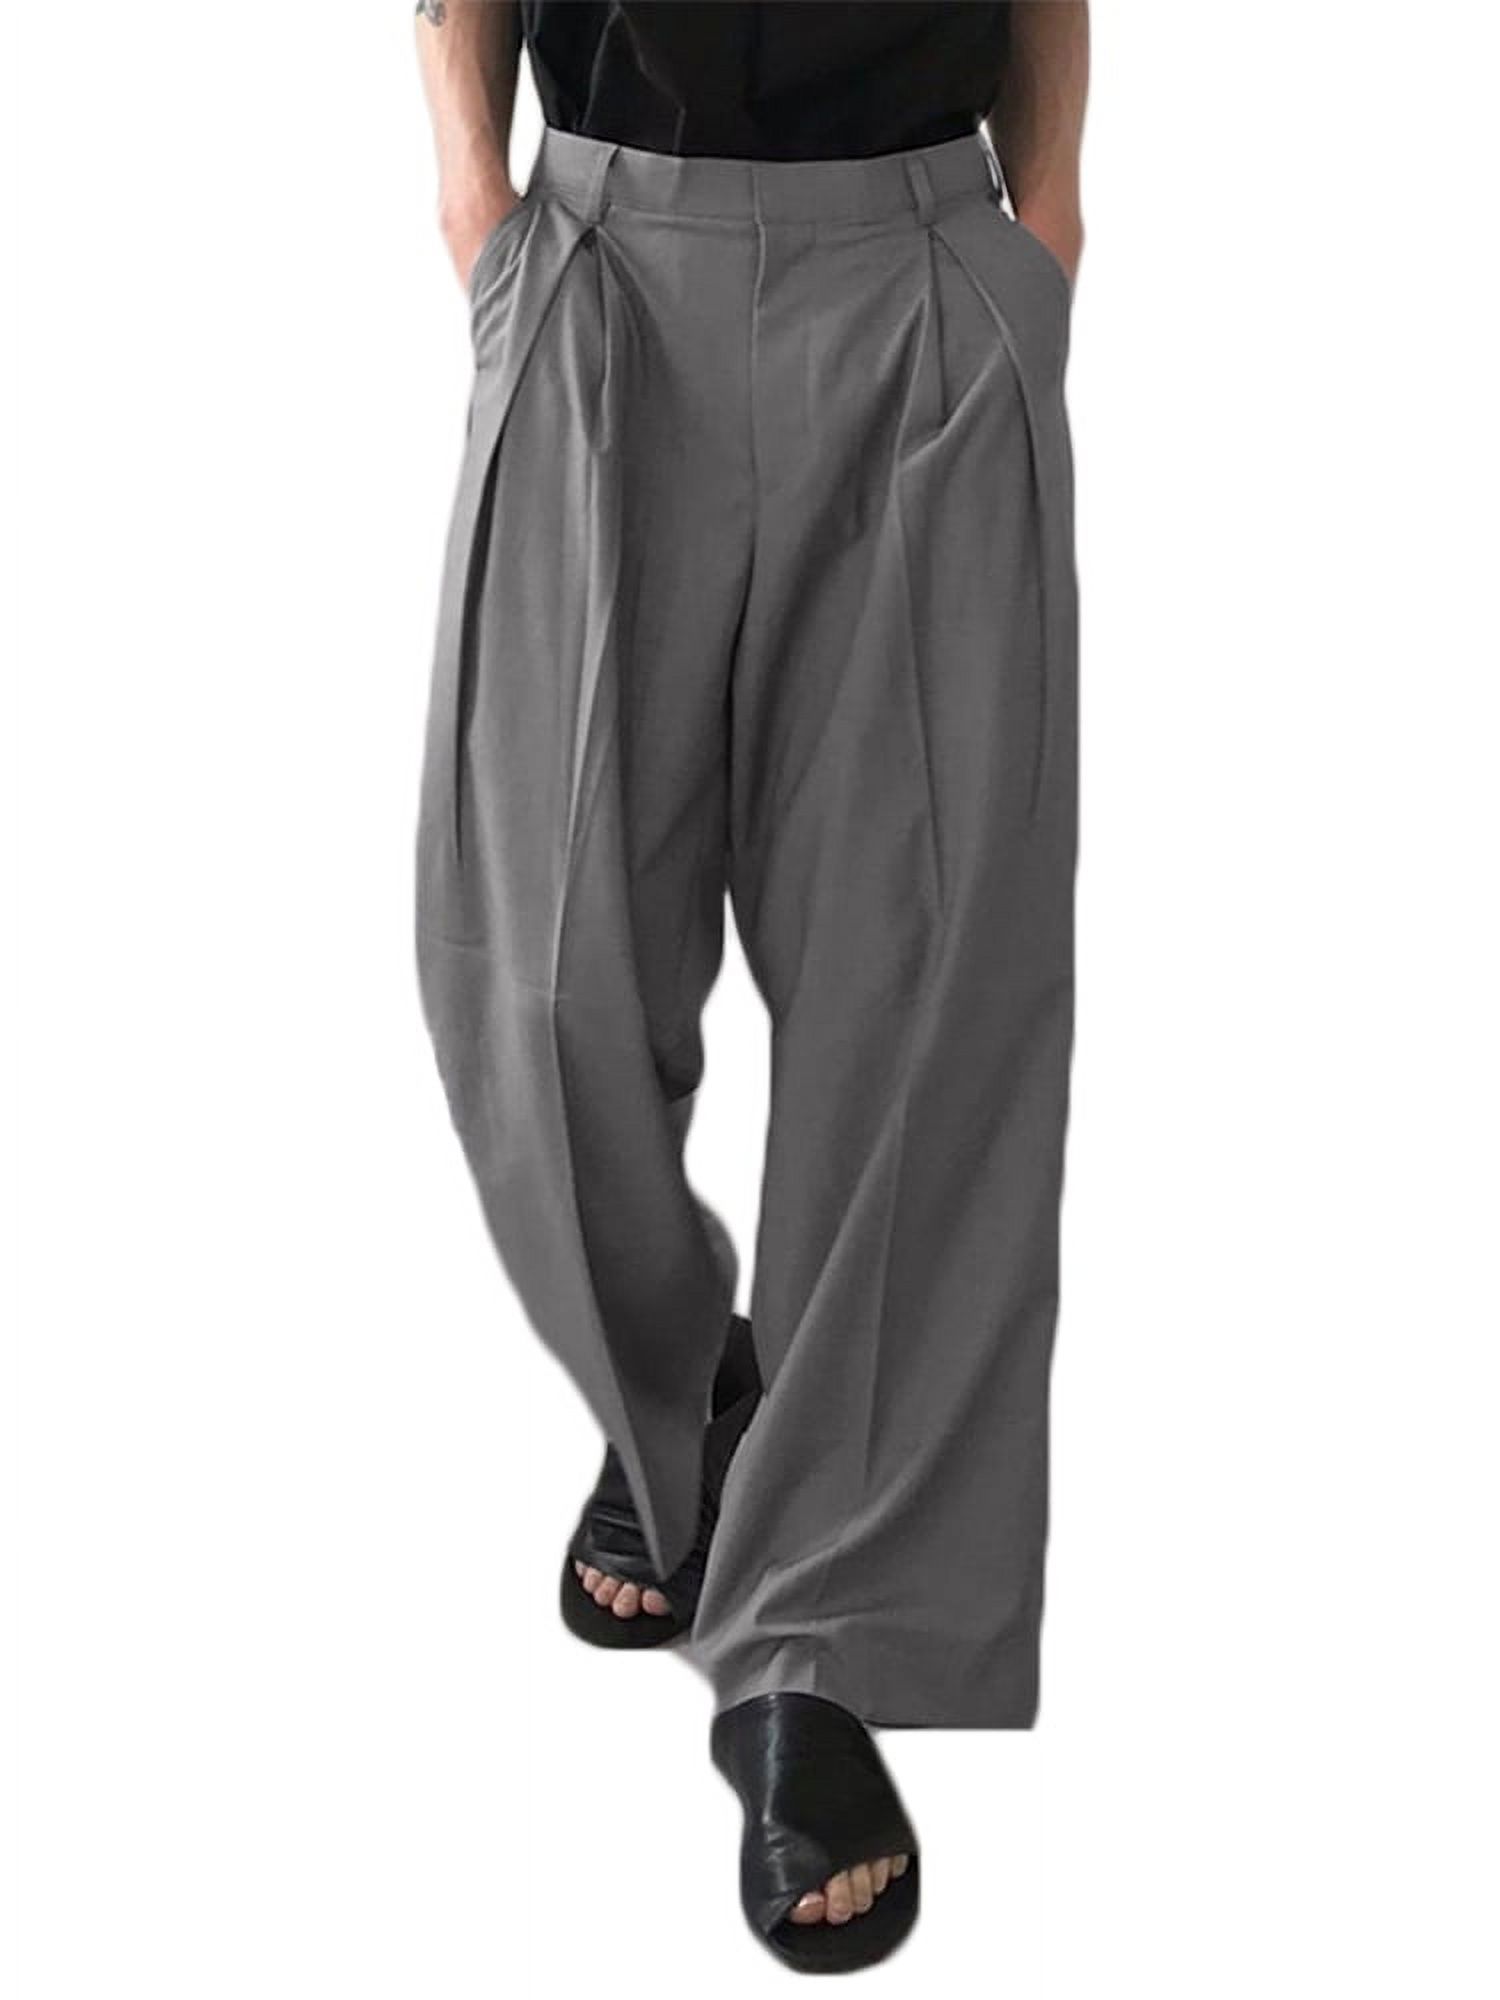 INCERUN Men's Loose Long Straight Solid Color Wide Leg Pants Trousers Black/Grey - image 1 of 5